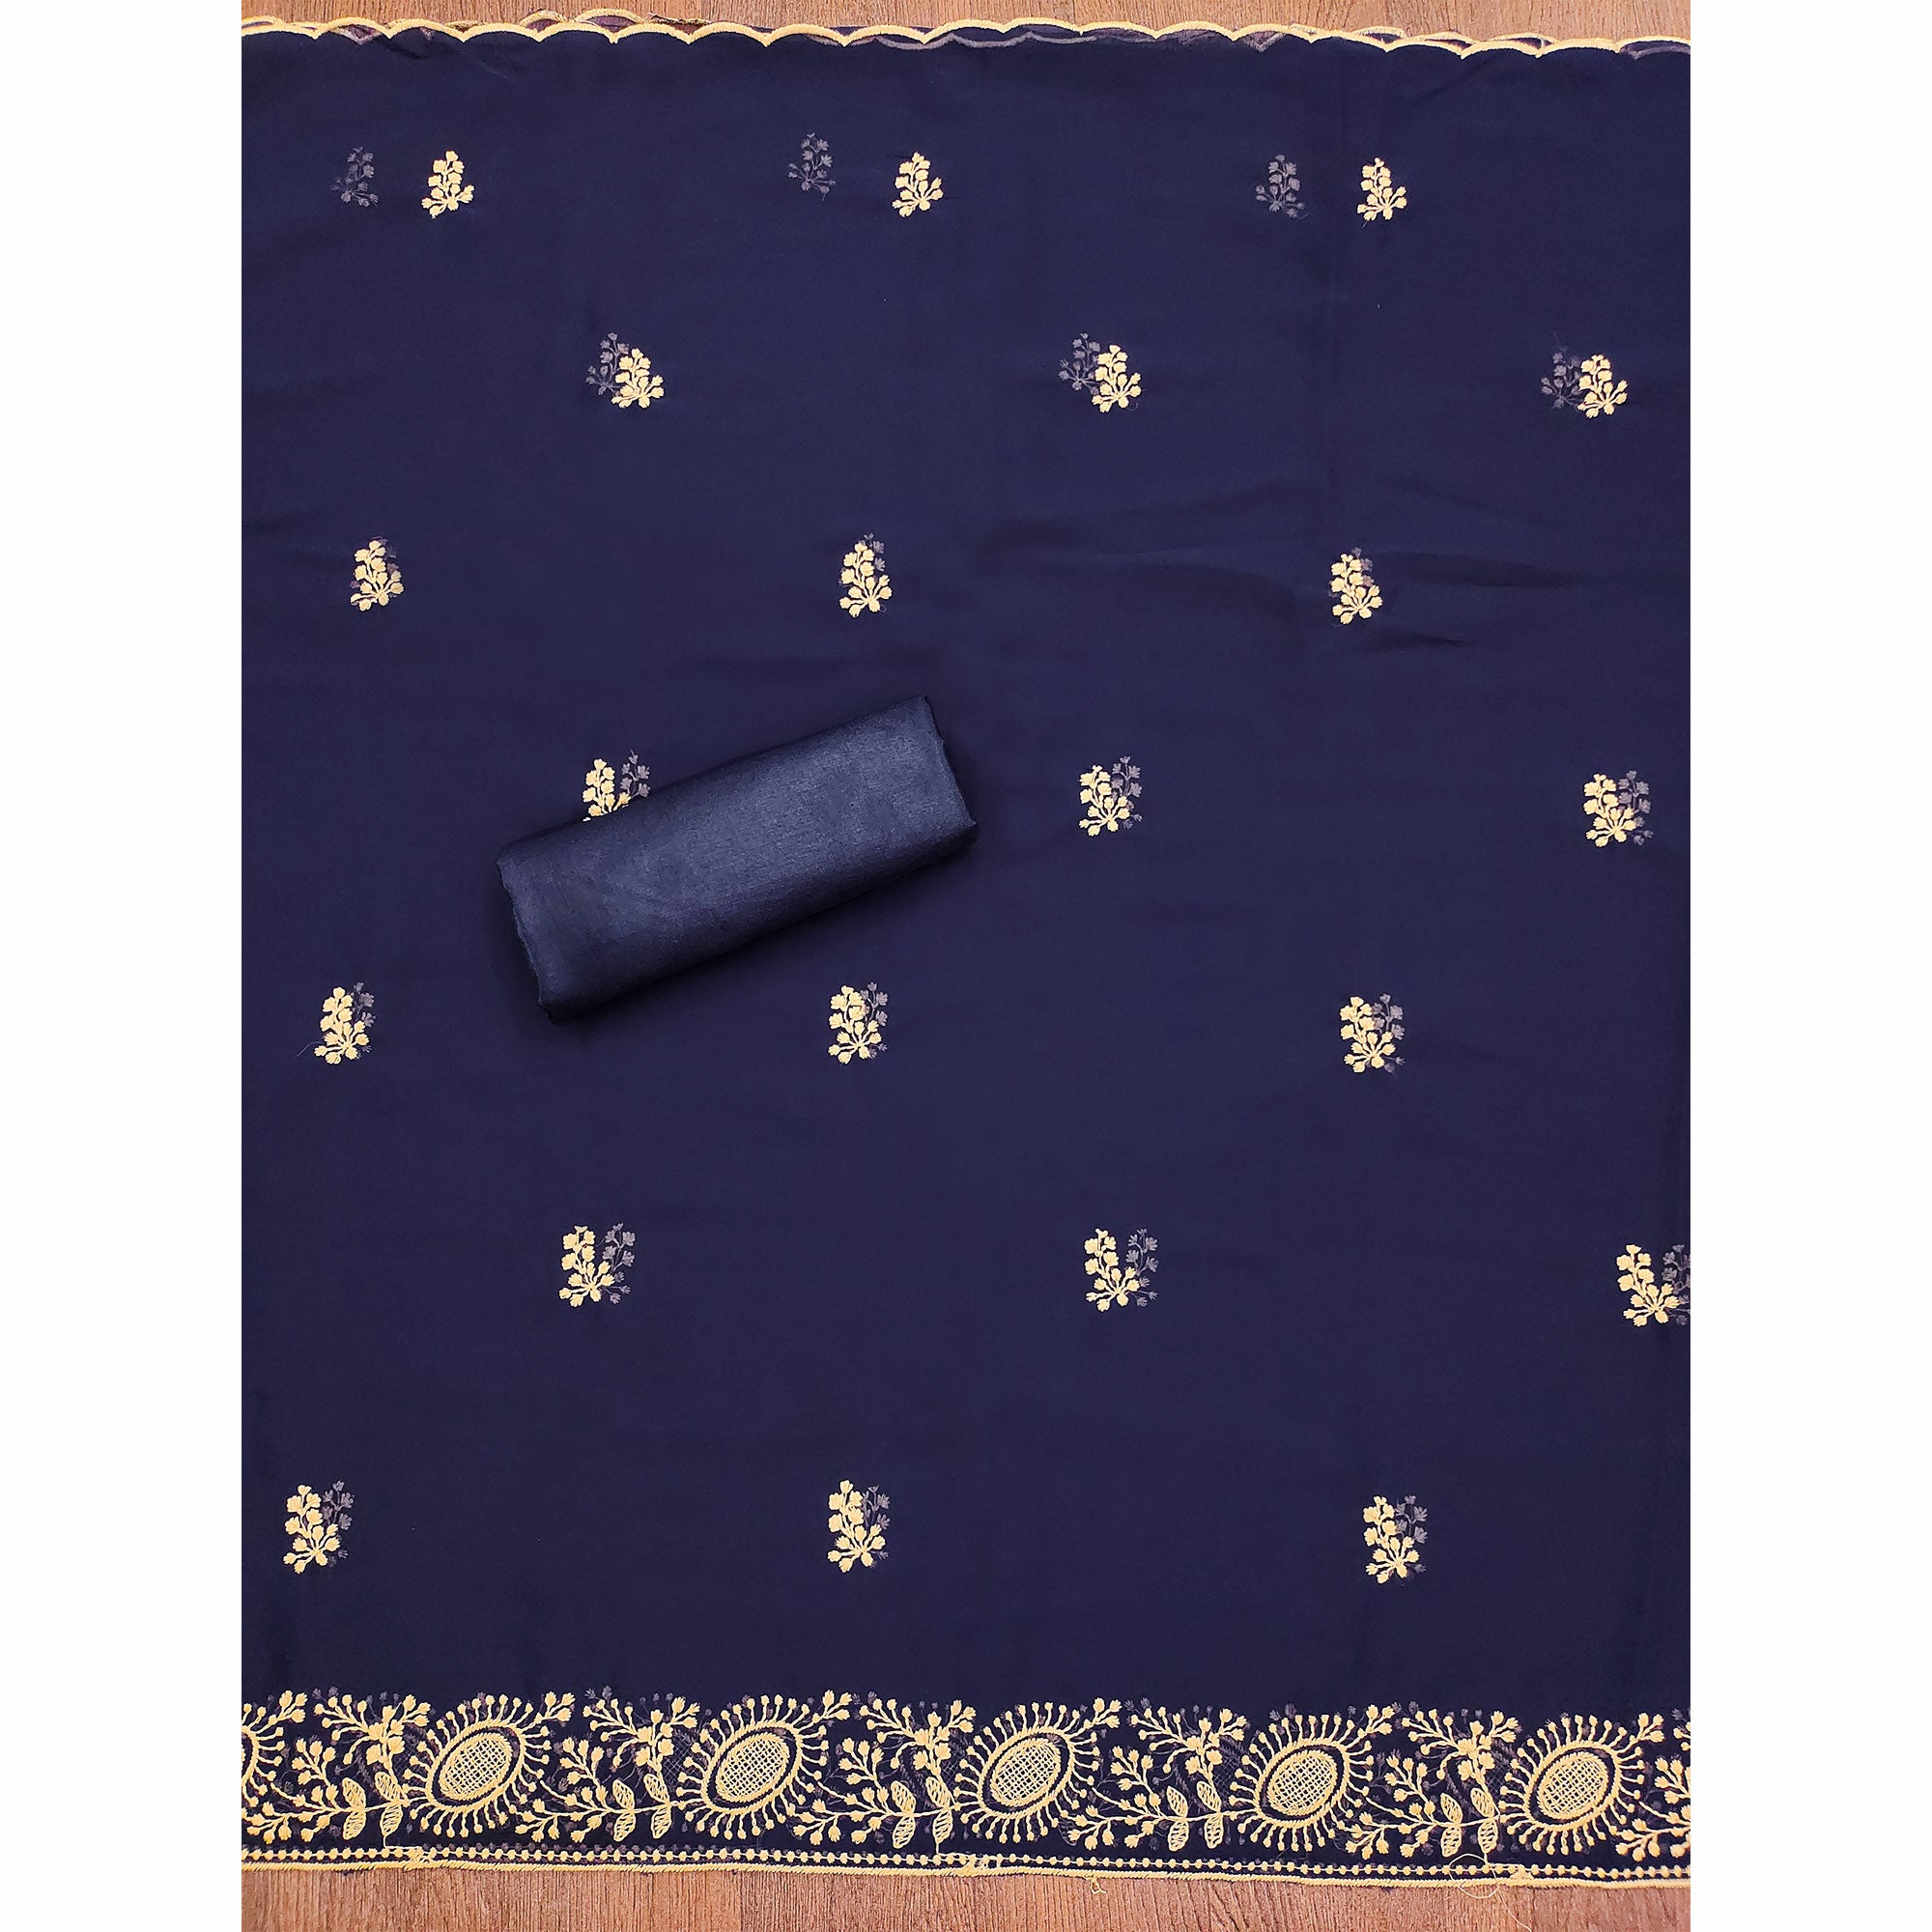 Navy Blue Floral Embroidered Georgette Dress Material